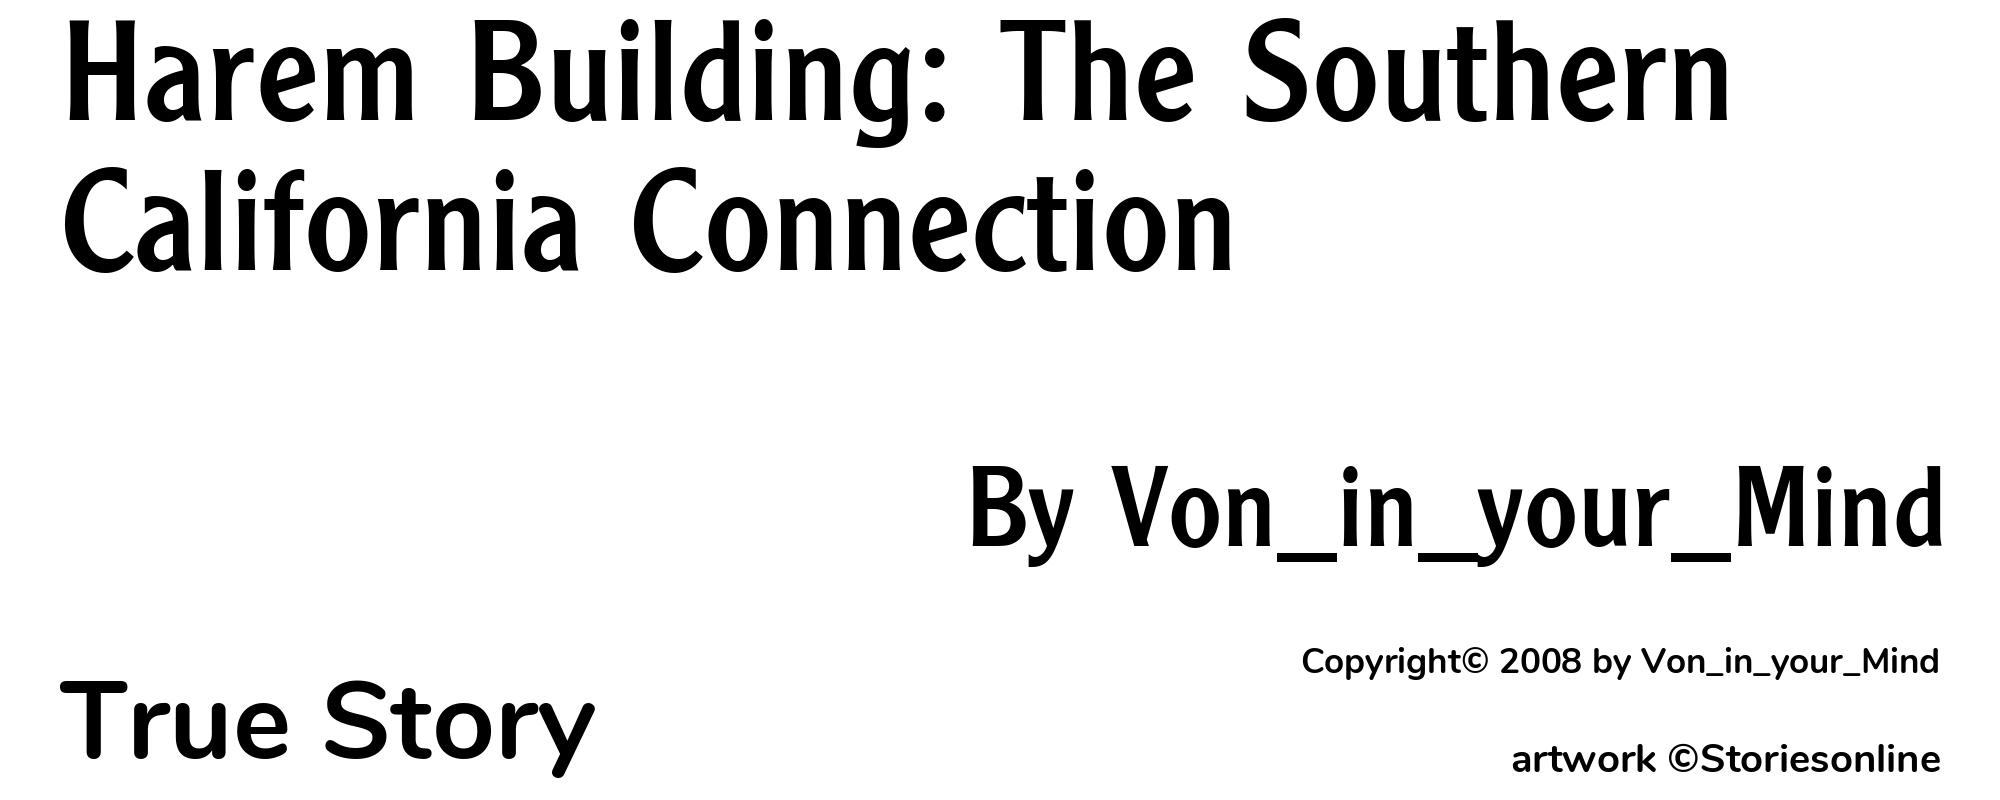 Harem Building: The Southern California Connection - Cover